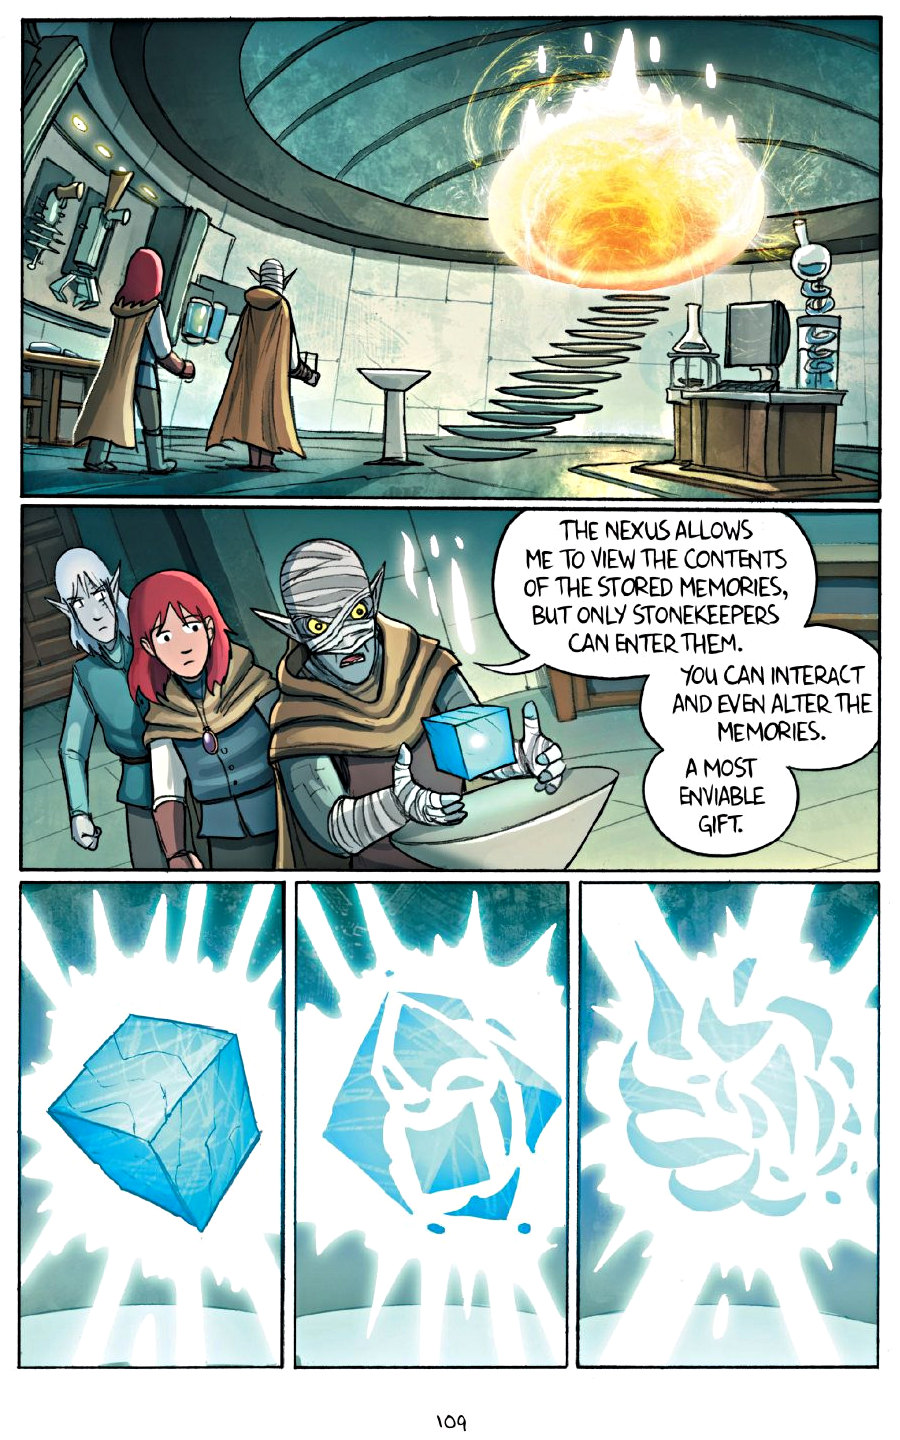 page 109 of amulet 7 firelight graphic novel